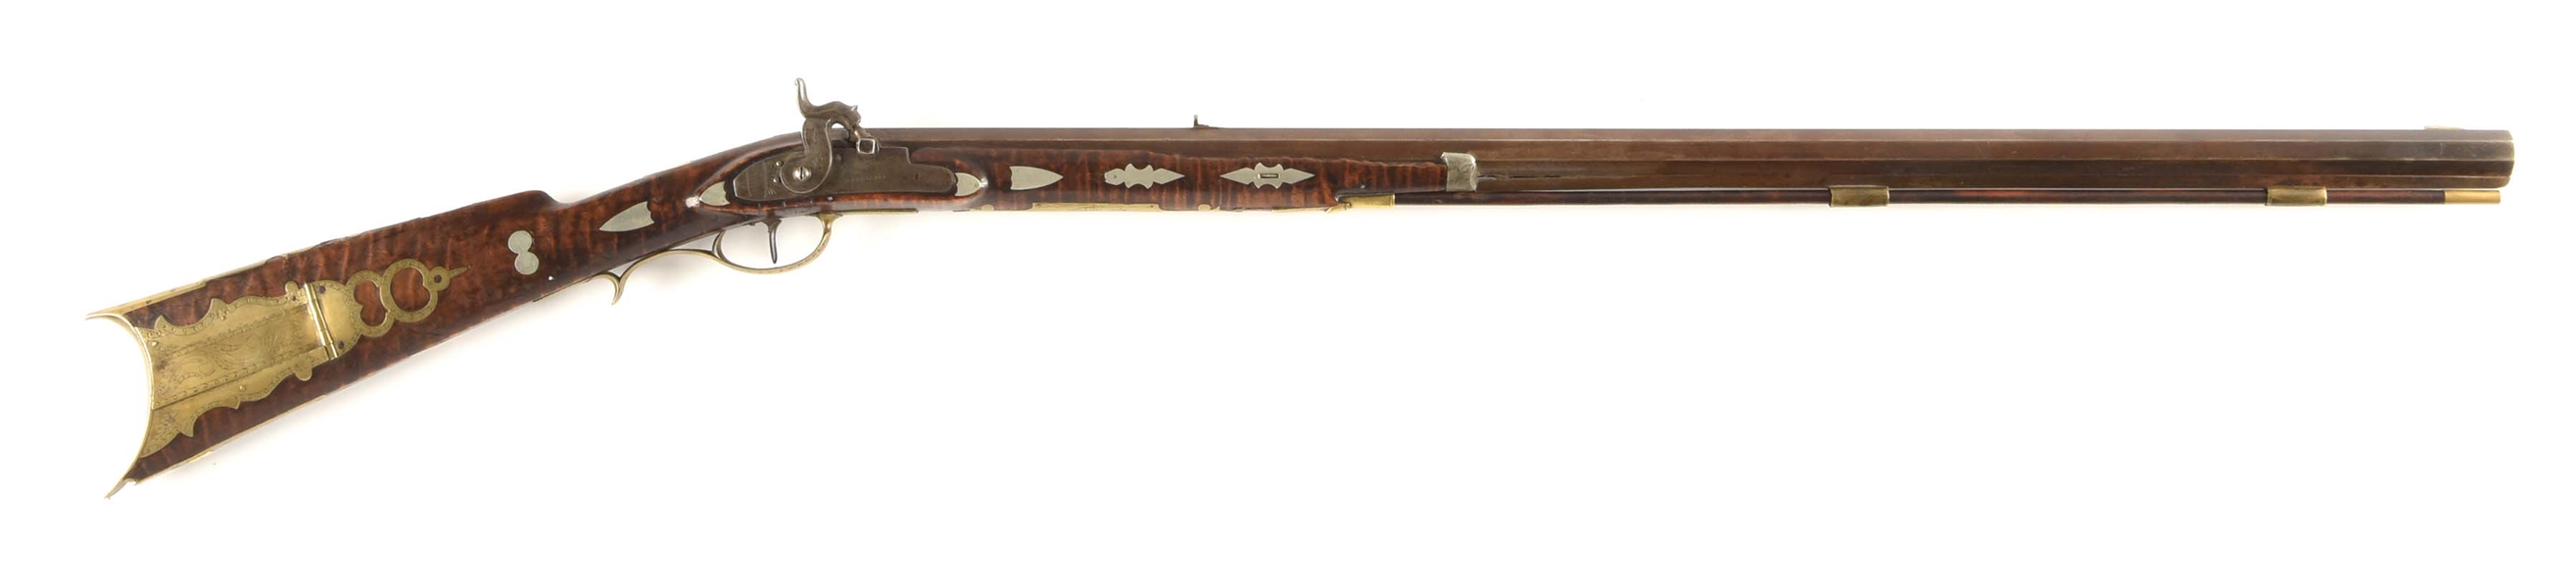 (A) PROFUSELY SILVER INLAID PERCUSSION KENTUCKY LONG RIFLE BY J. JENNINGS.